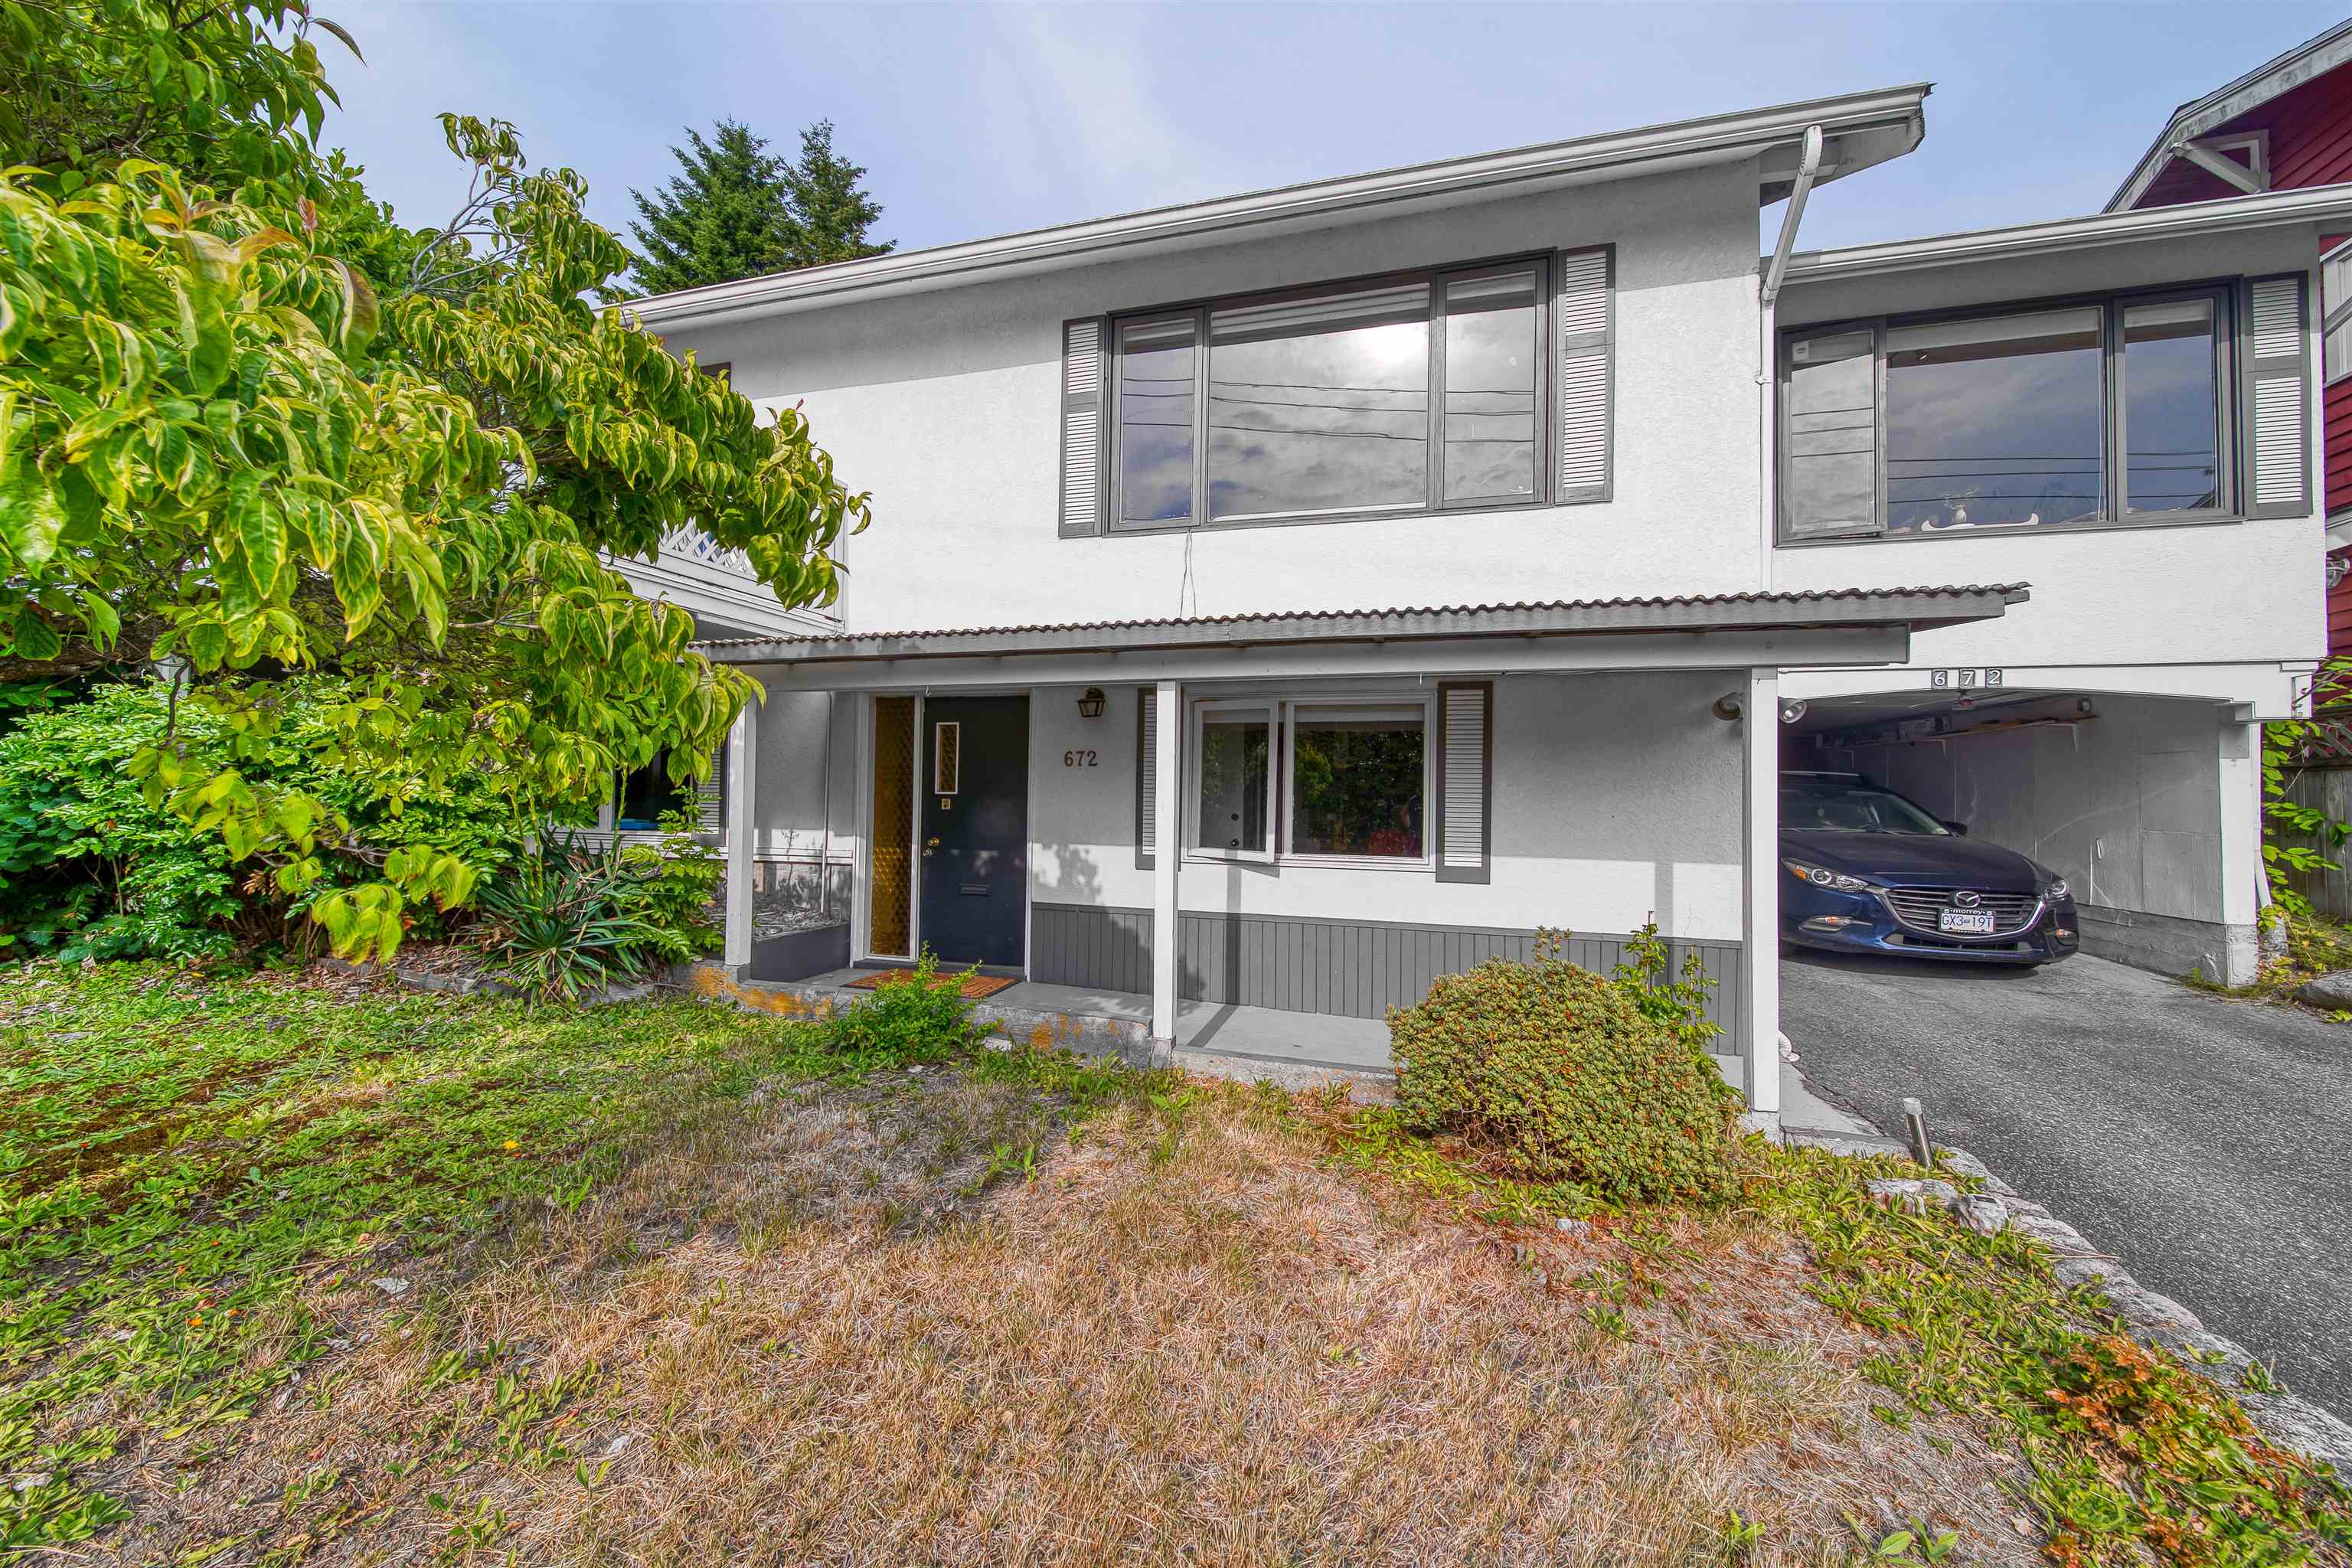 672 11TH STREET, West Vancouver, British Columbia, 4 Bedrooms Bedrooms, ,3 BathroomsBathrooms,Residential Detached,For Sale,R2799462